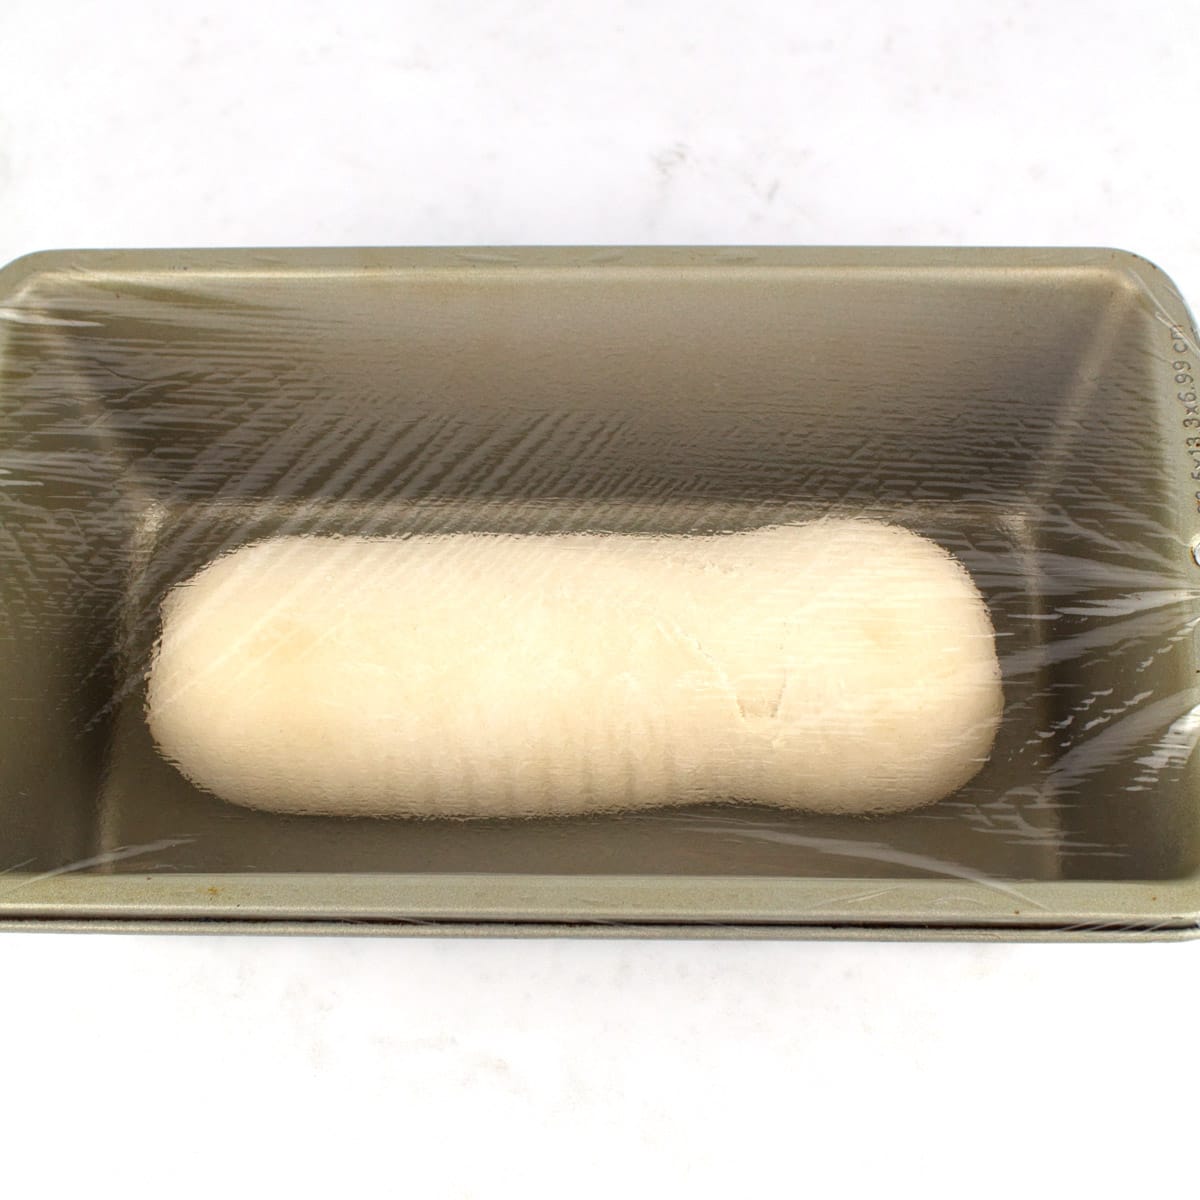 Rhodes bread dough frozen in a loaf pan with plastic wrap over the top.